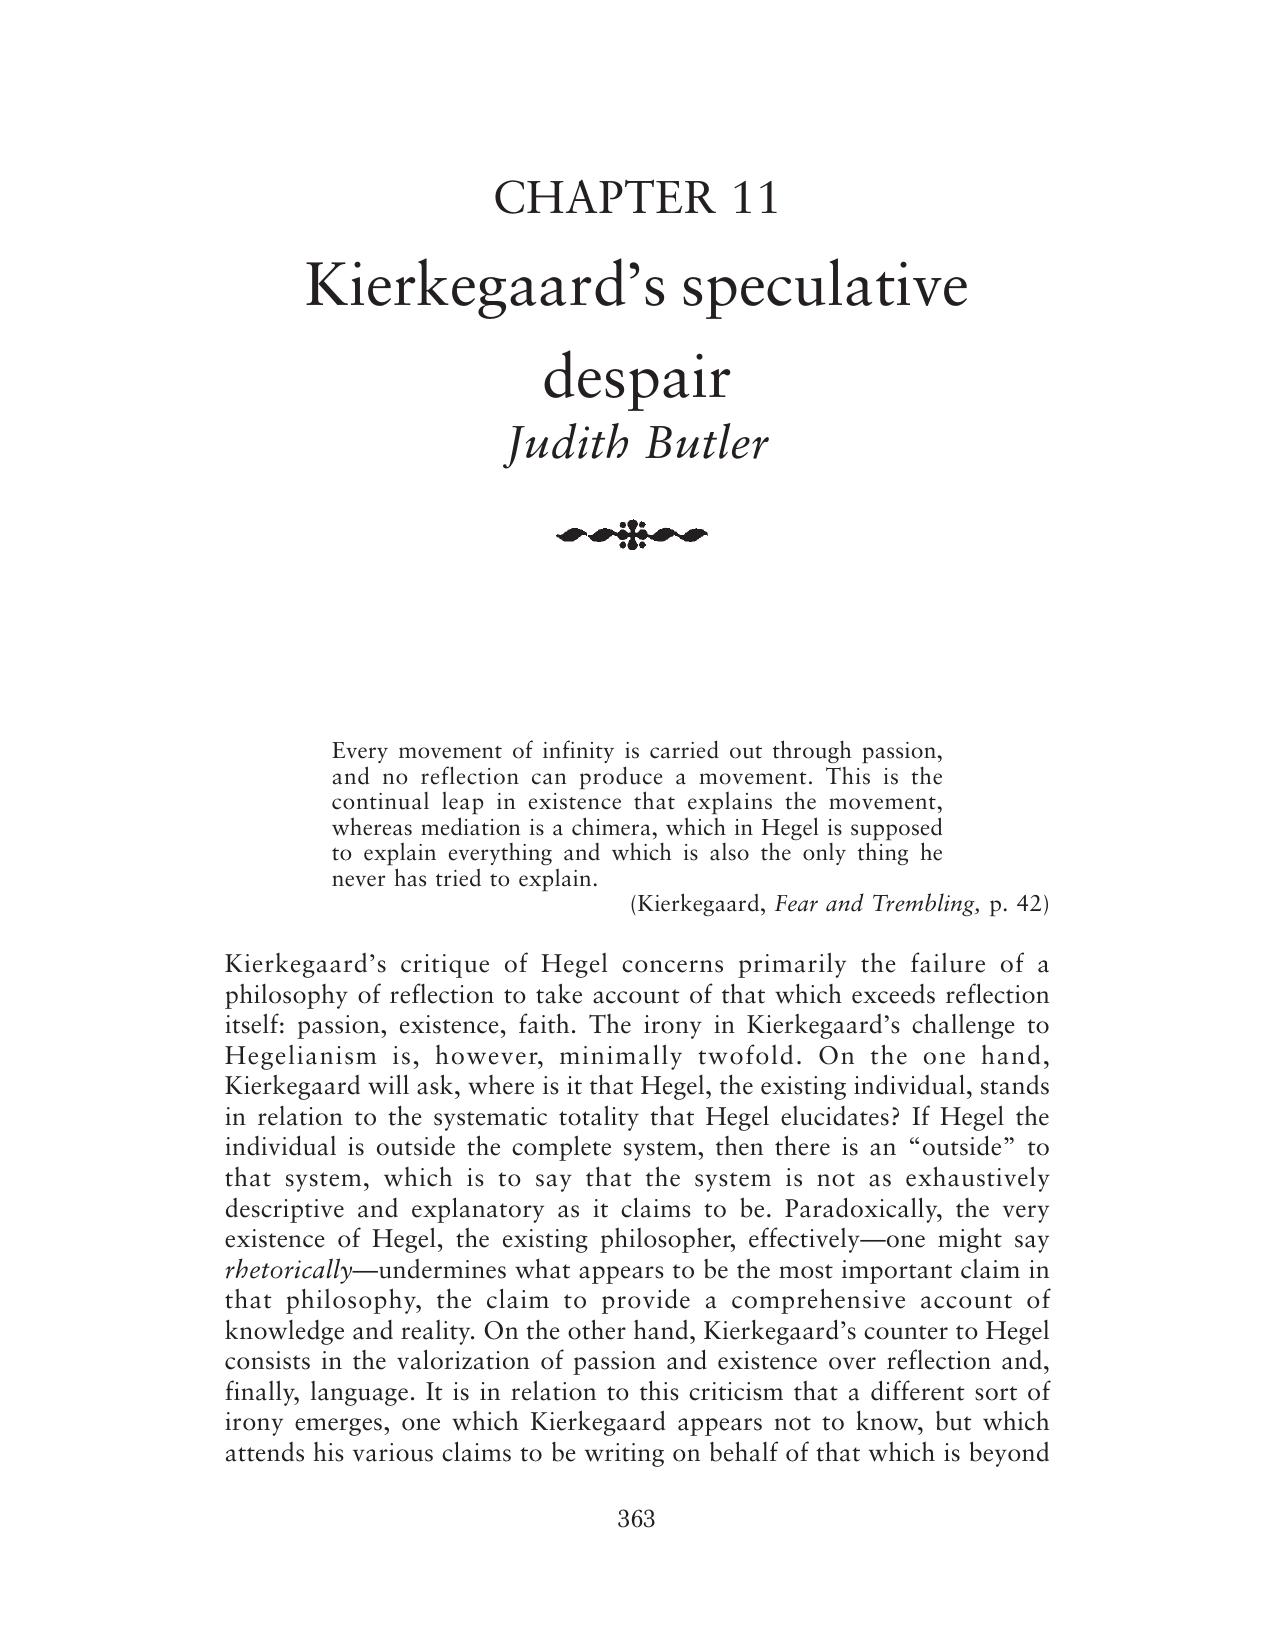 Aga Of German Idealism [Kant, Fichte, Hegel, Ant Others] [Chapter]